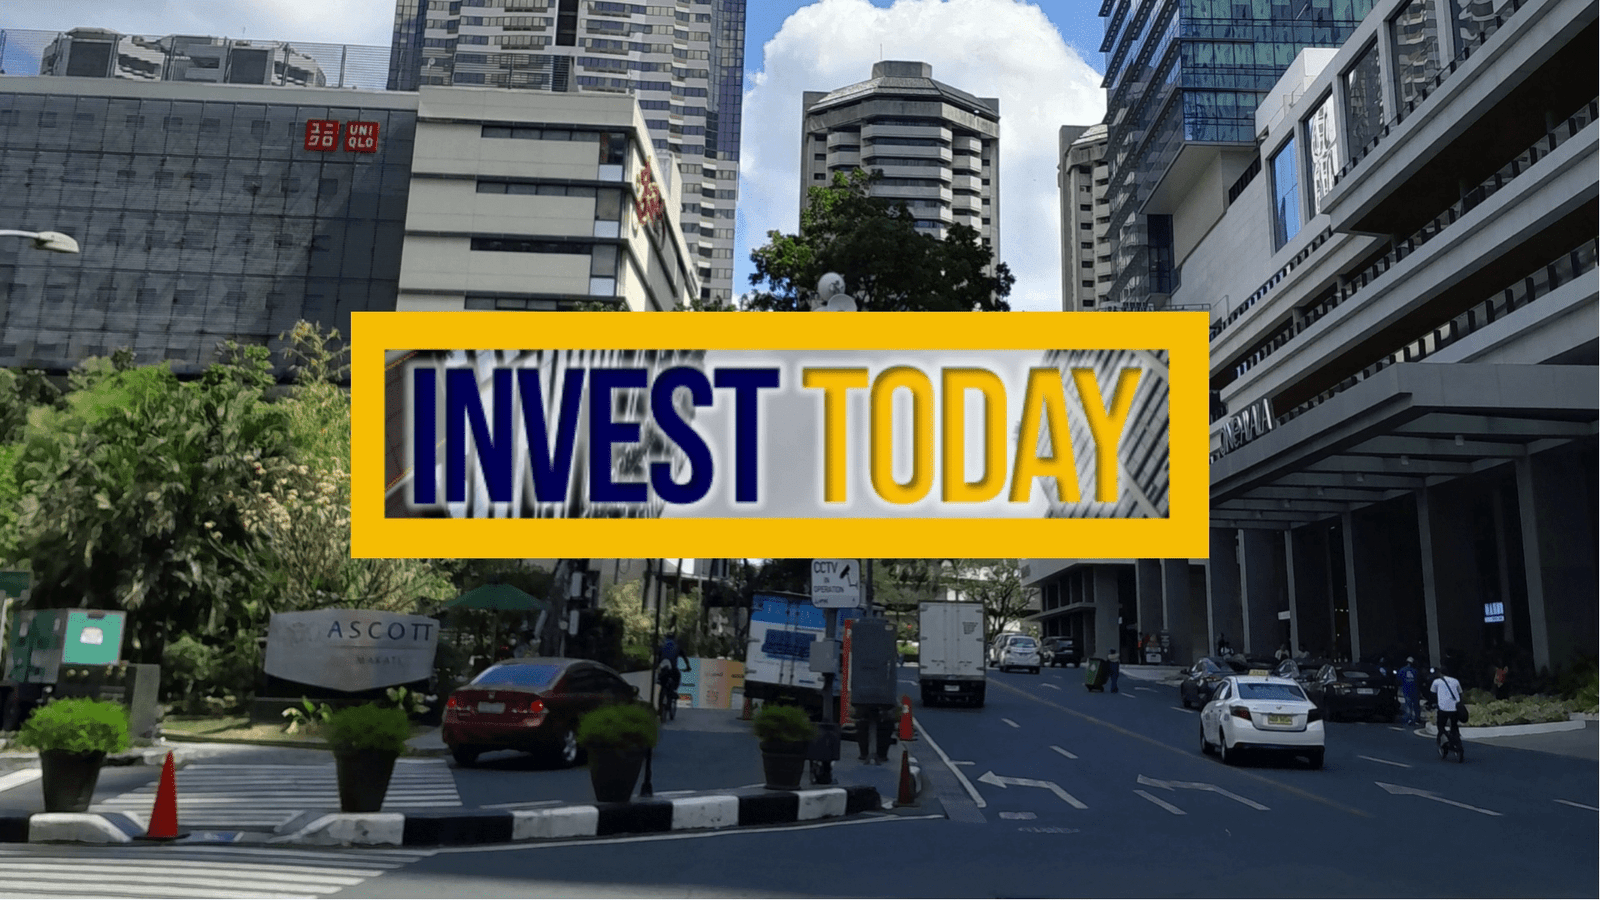 IS IT TO INVEST IN PAL HOLDINGS SHARES